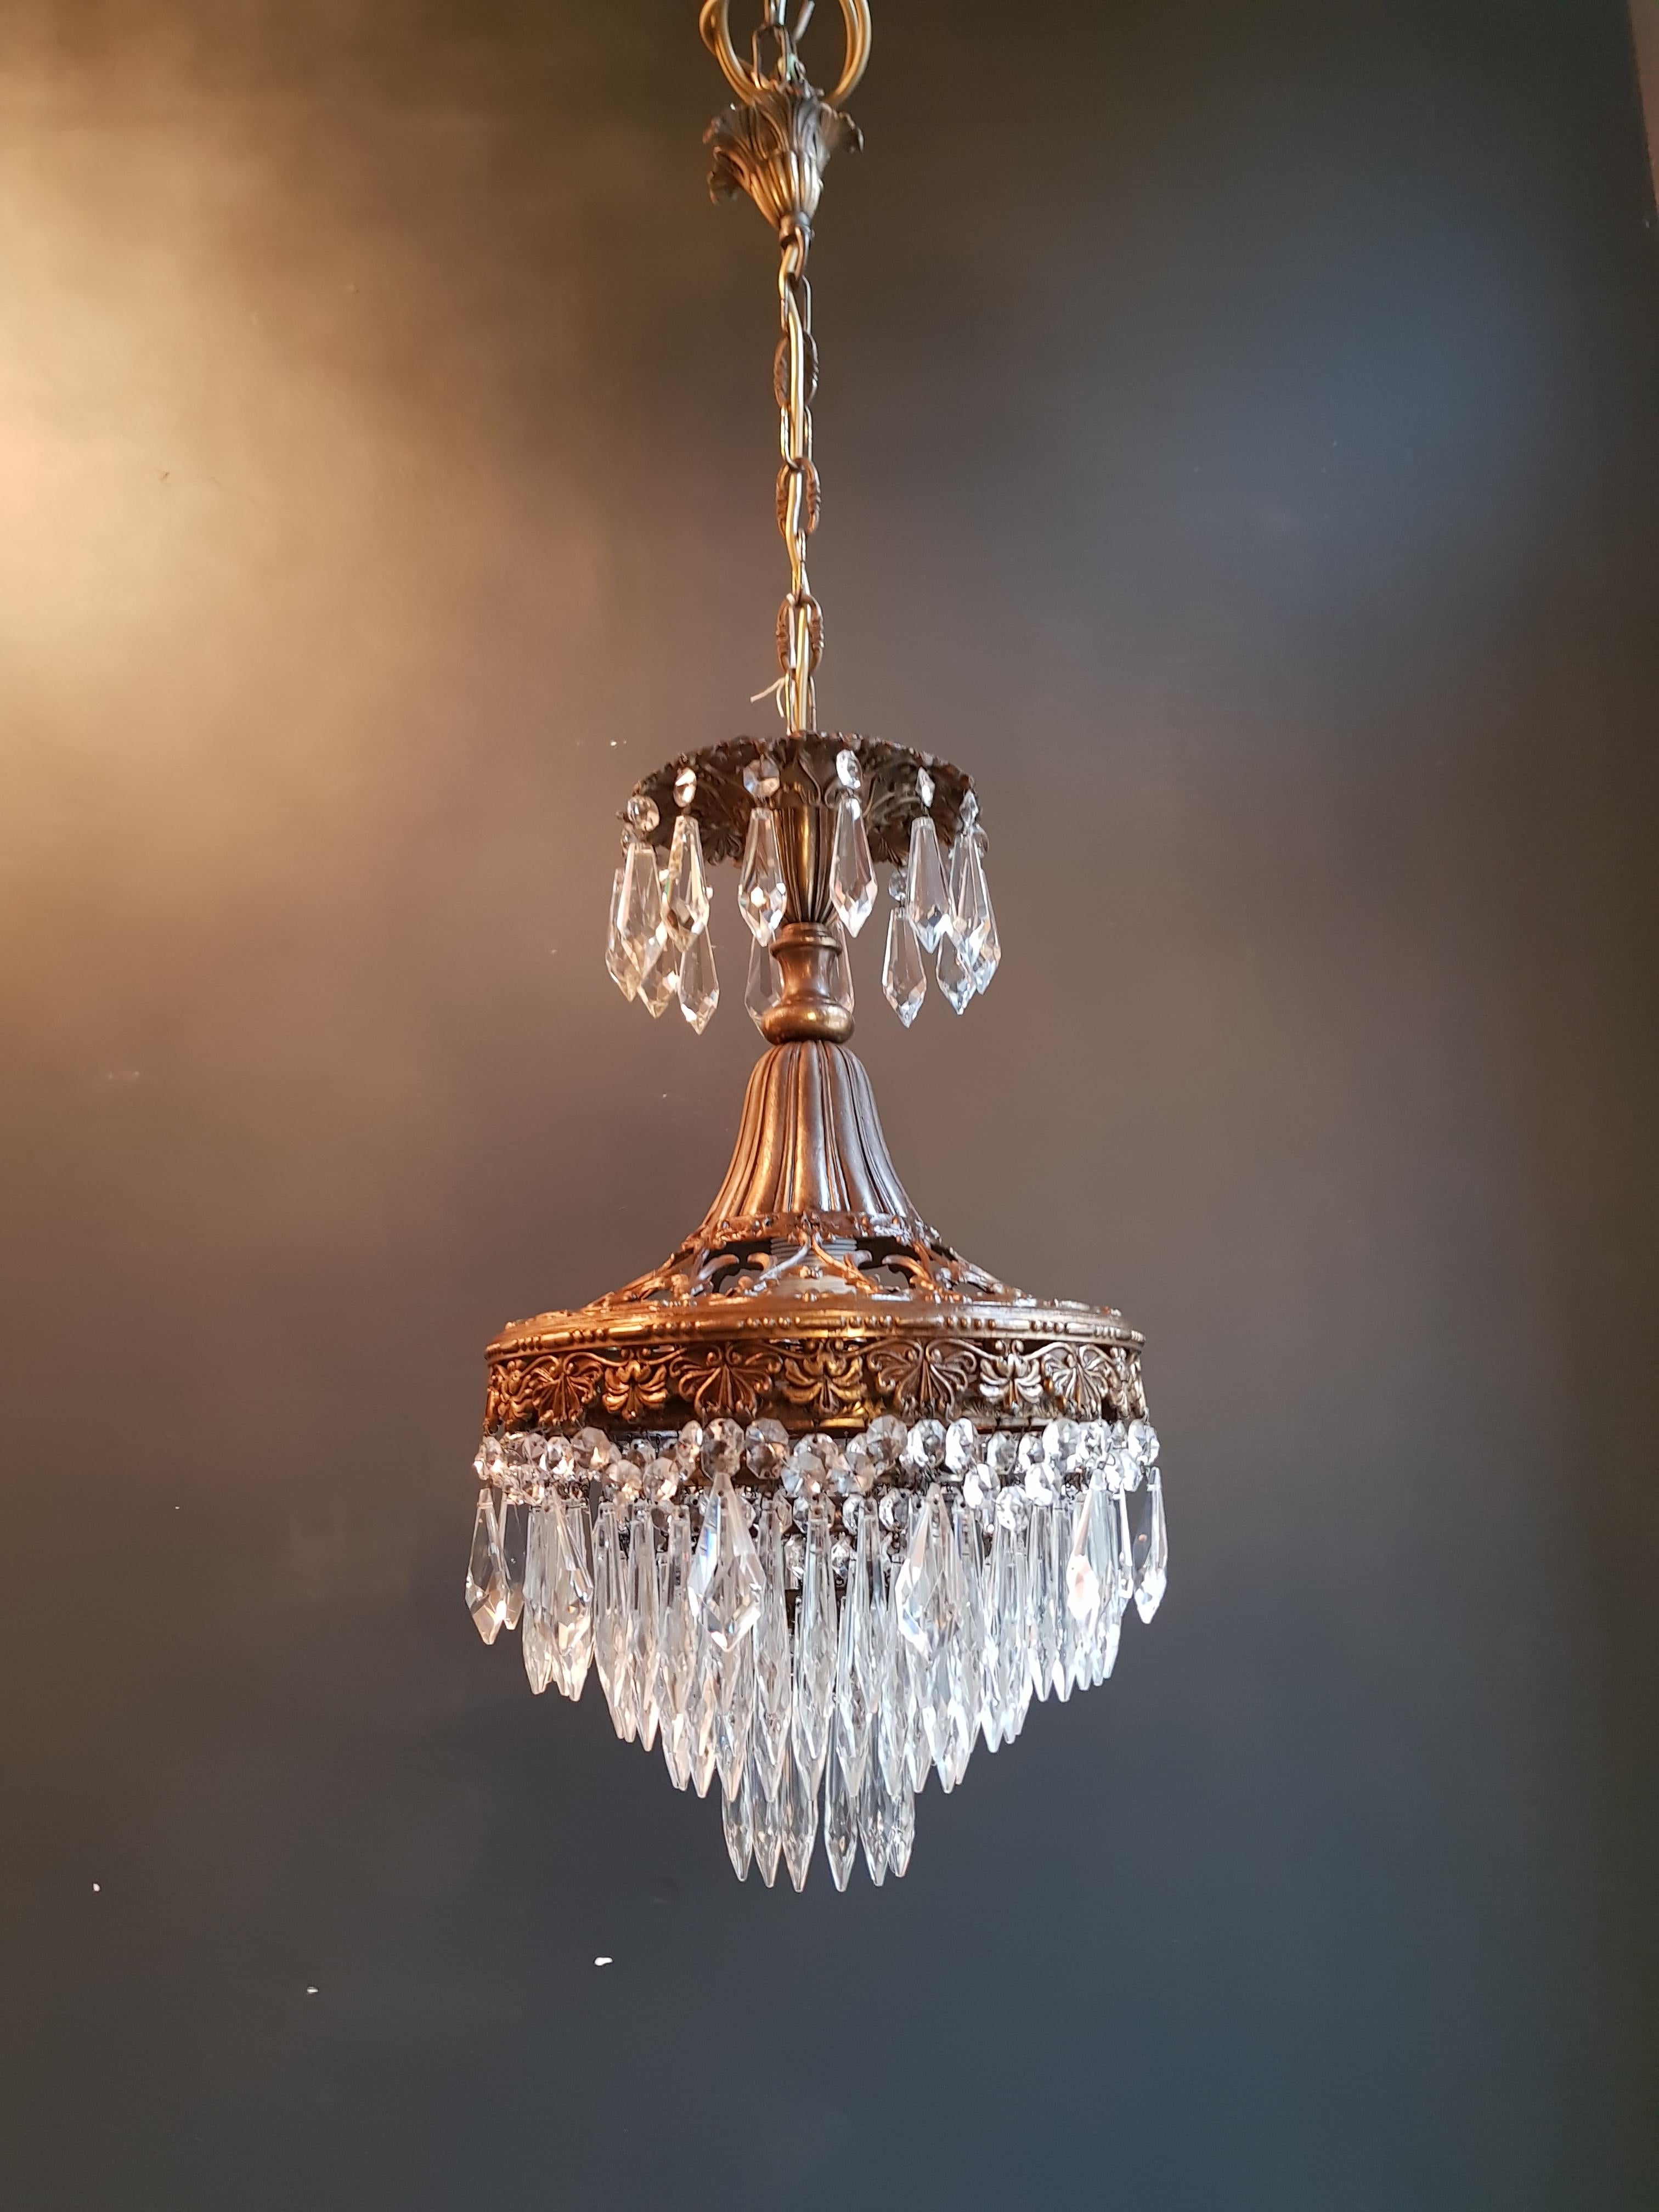 This fine pretty showpiece. Original preserved chandelier, circa 1930. Cabling and sockets completely renewed. Crystal hand knotted
Measures: Total height 99 cm, height without chain 53 cm, diameter 30 cm, weight (approximately) 5 kg.

Number of